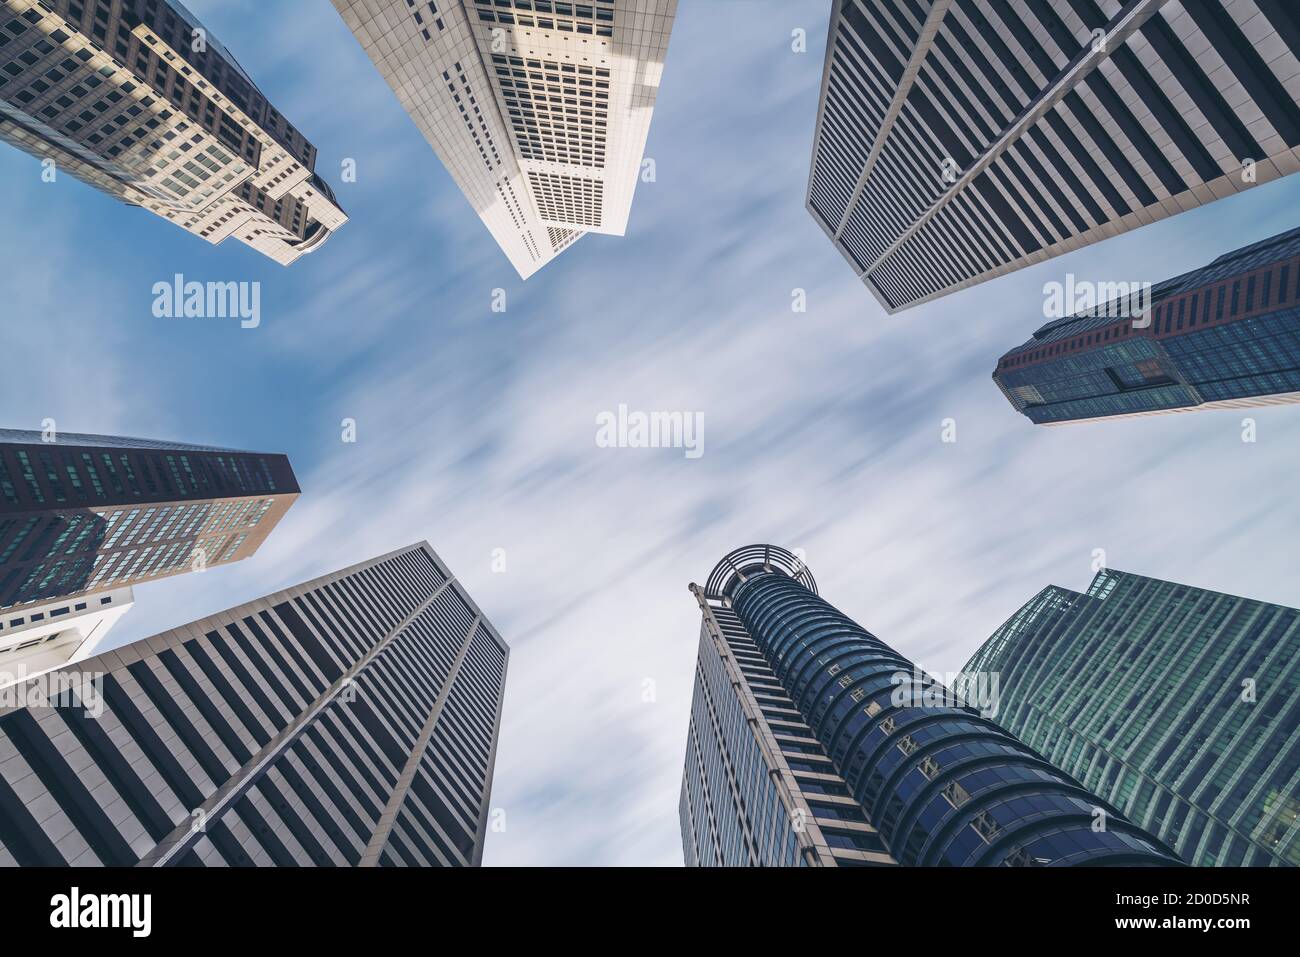 Business buildings skyline looking up with blue sky. Business downtown and skyscrapers, high-rise buildings, modern architecture buildings. Stock Photo